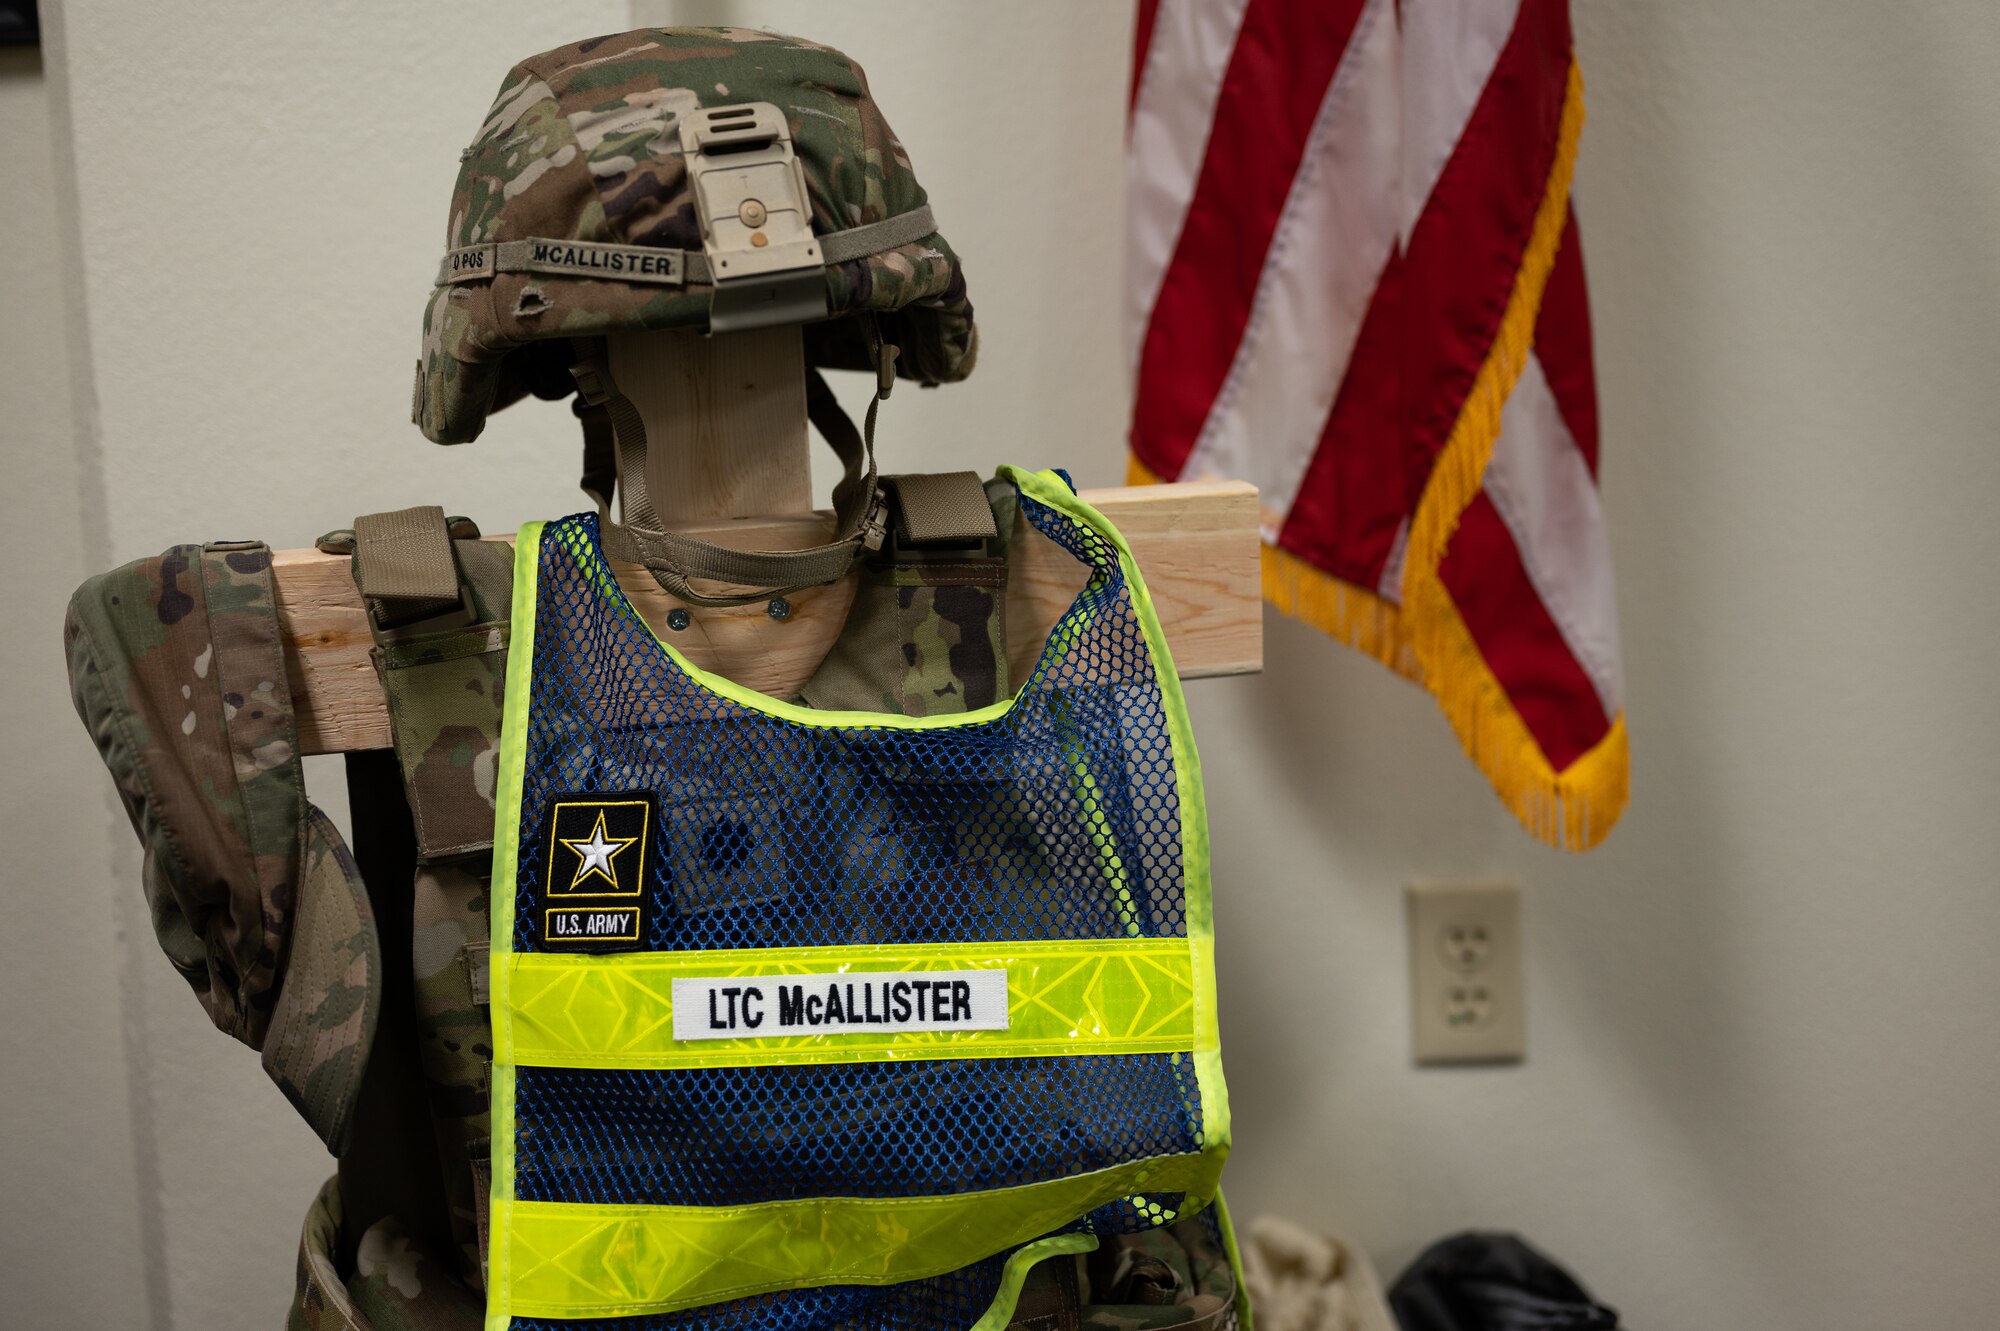 U.S. Army Lt. Col. John McAllister’s Kevlar body armor and physical training vest sits on display in his office at Goodfellow Air Force Base, Texas, August 2, 2022. McAllister wears these items when performing simulated exercises and leading physical training with the soldiers he commands. (U.S. Air Force photo by Senior Airman Michael Bowman)